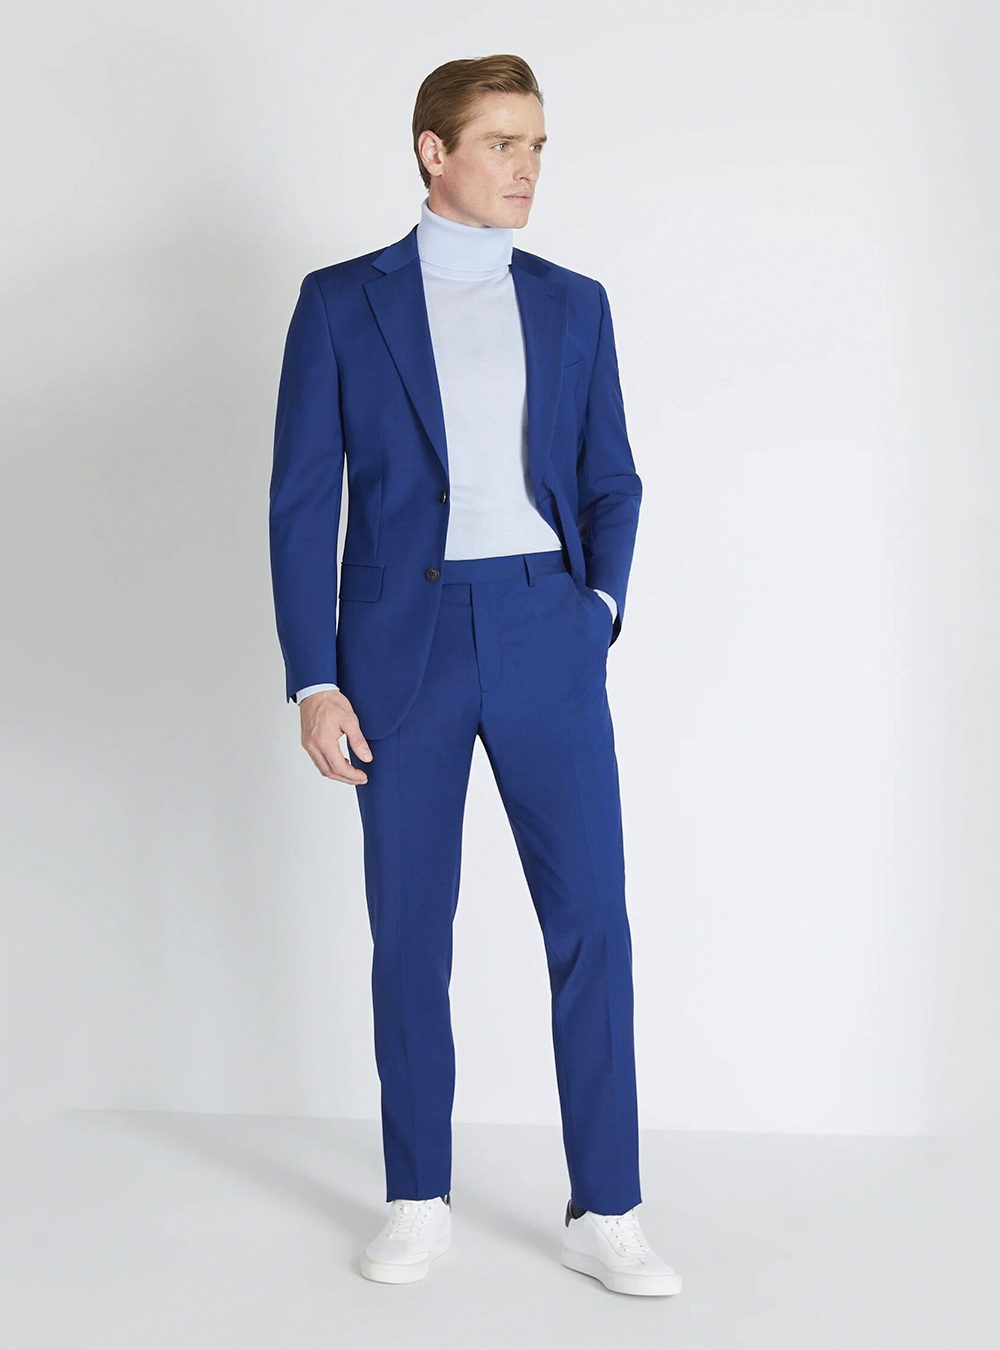 Blue suit, light blue turtleneck and white sneakers